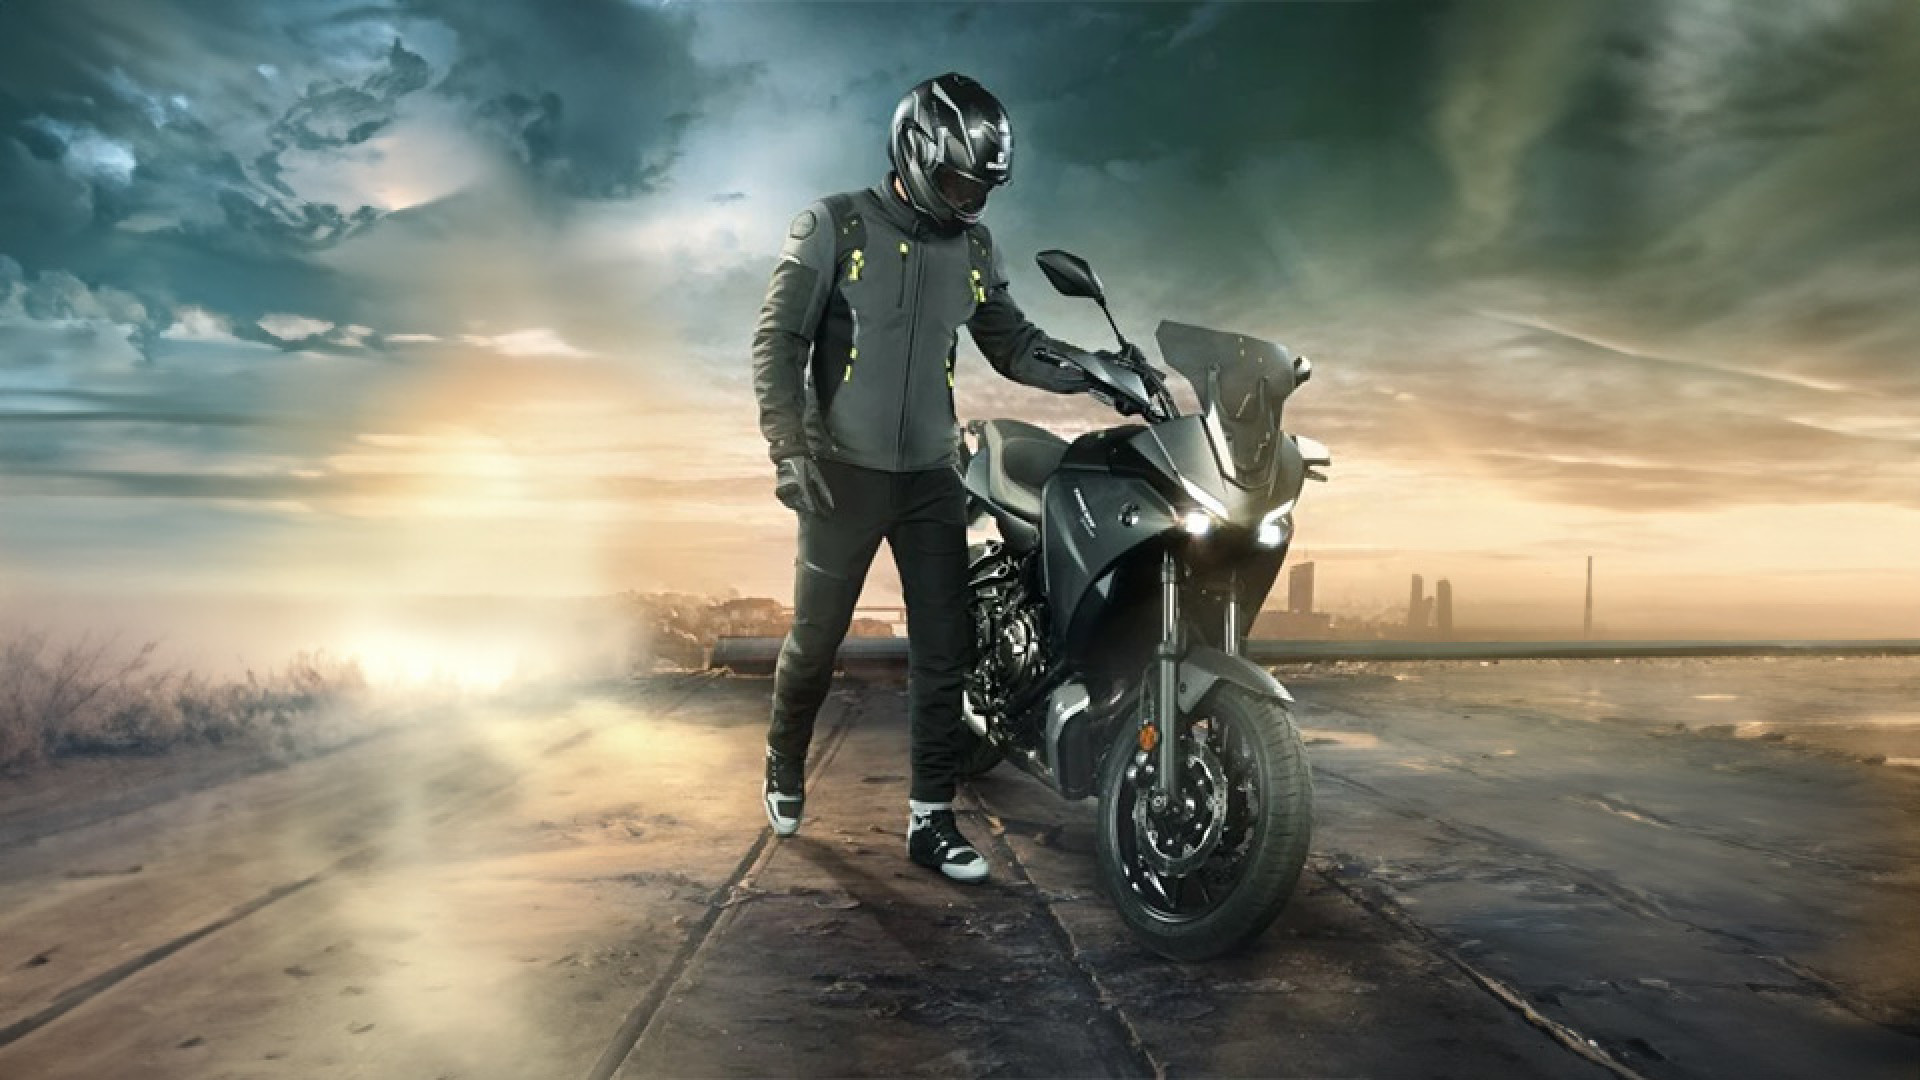 https://www.raceleathers.co.uk/image/cache/catalog/Blog%20Images/Bering%20Alkor%20Motorcycle%20Pants%20Review-1920x1080.jpg